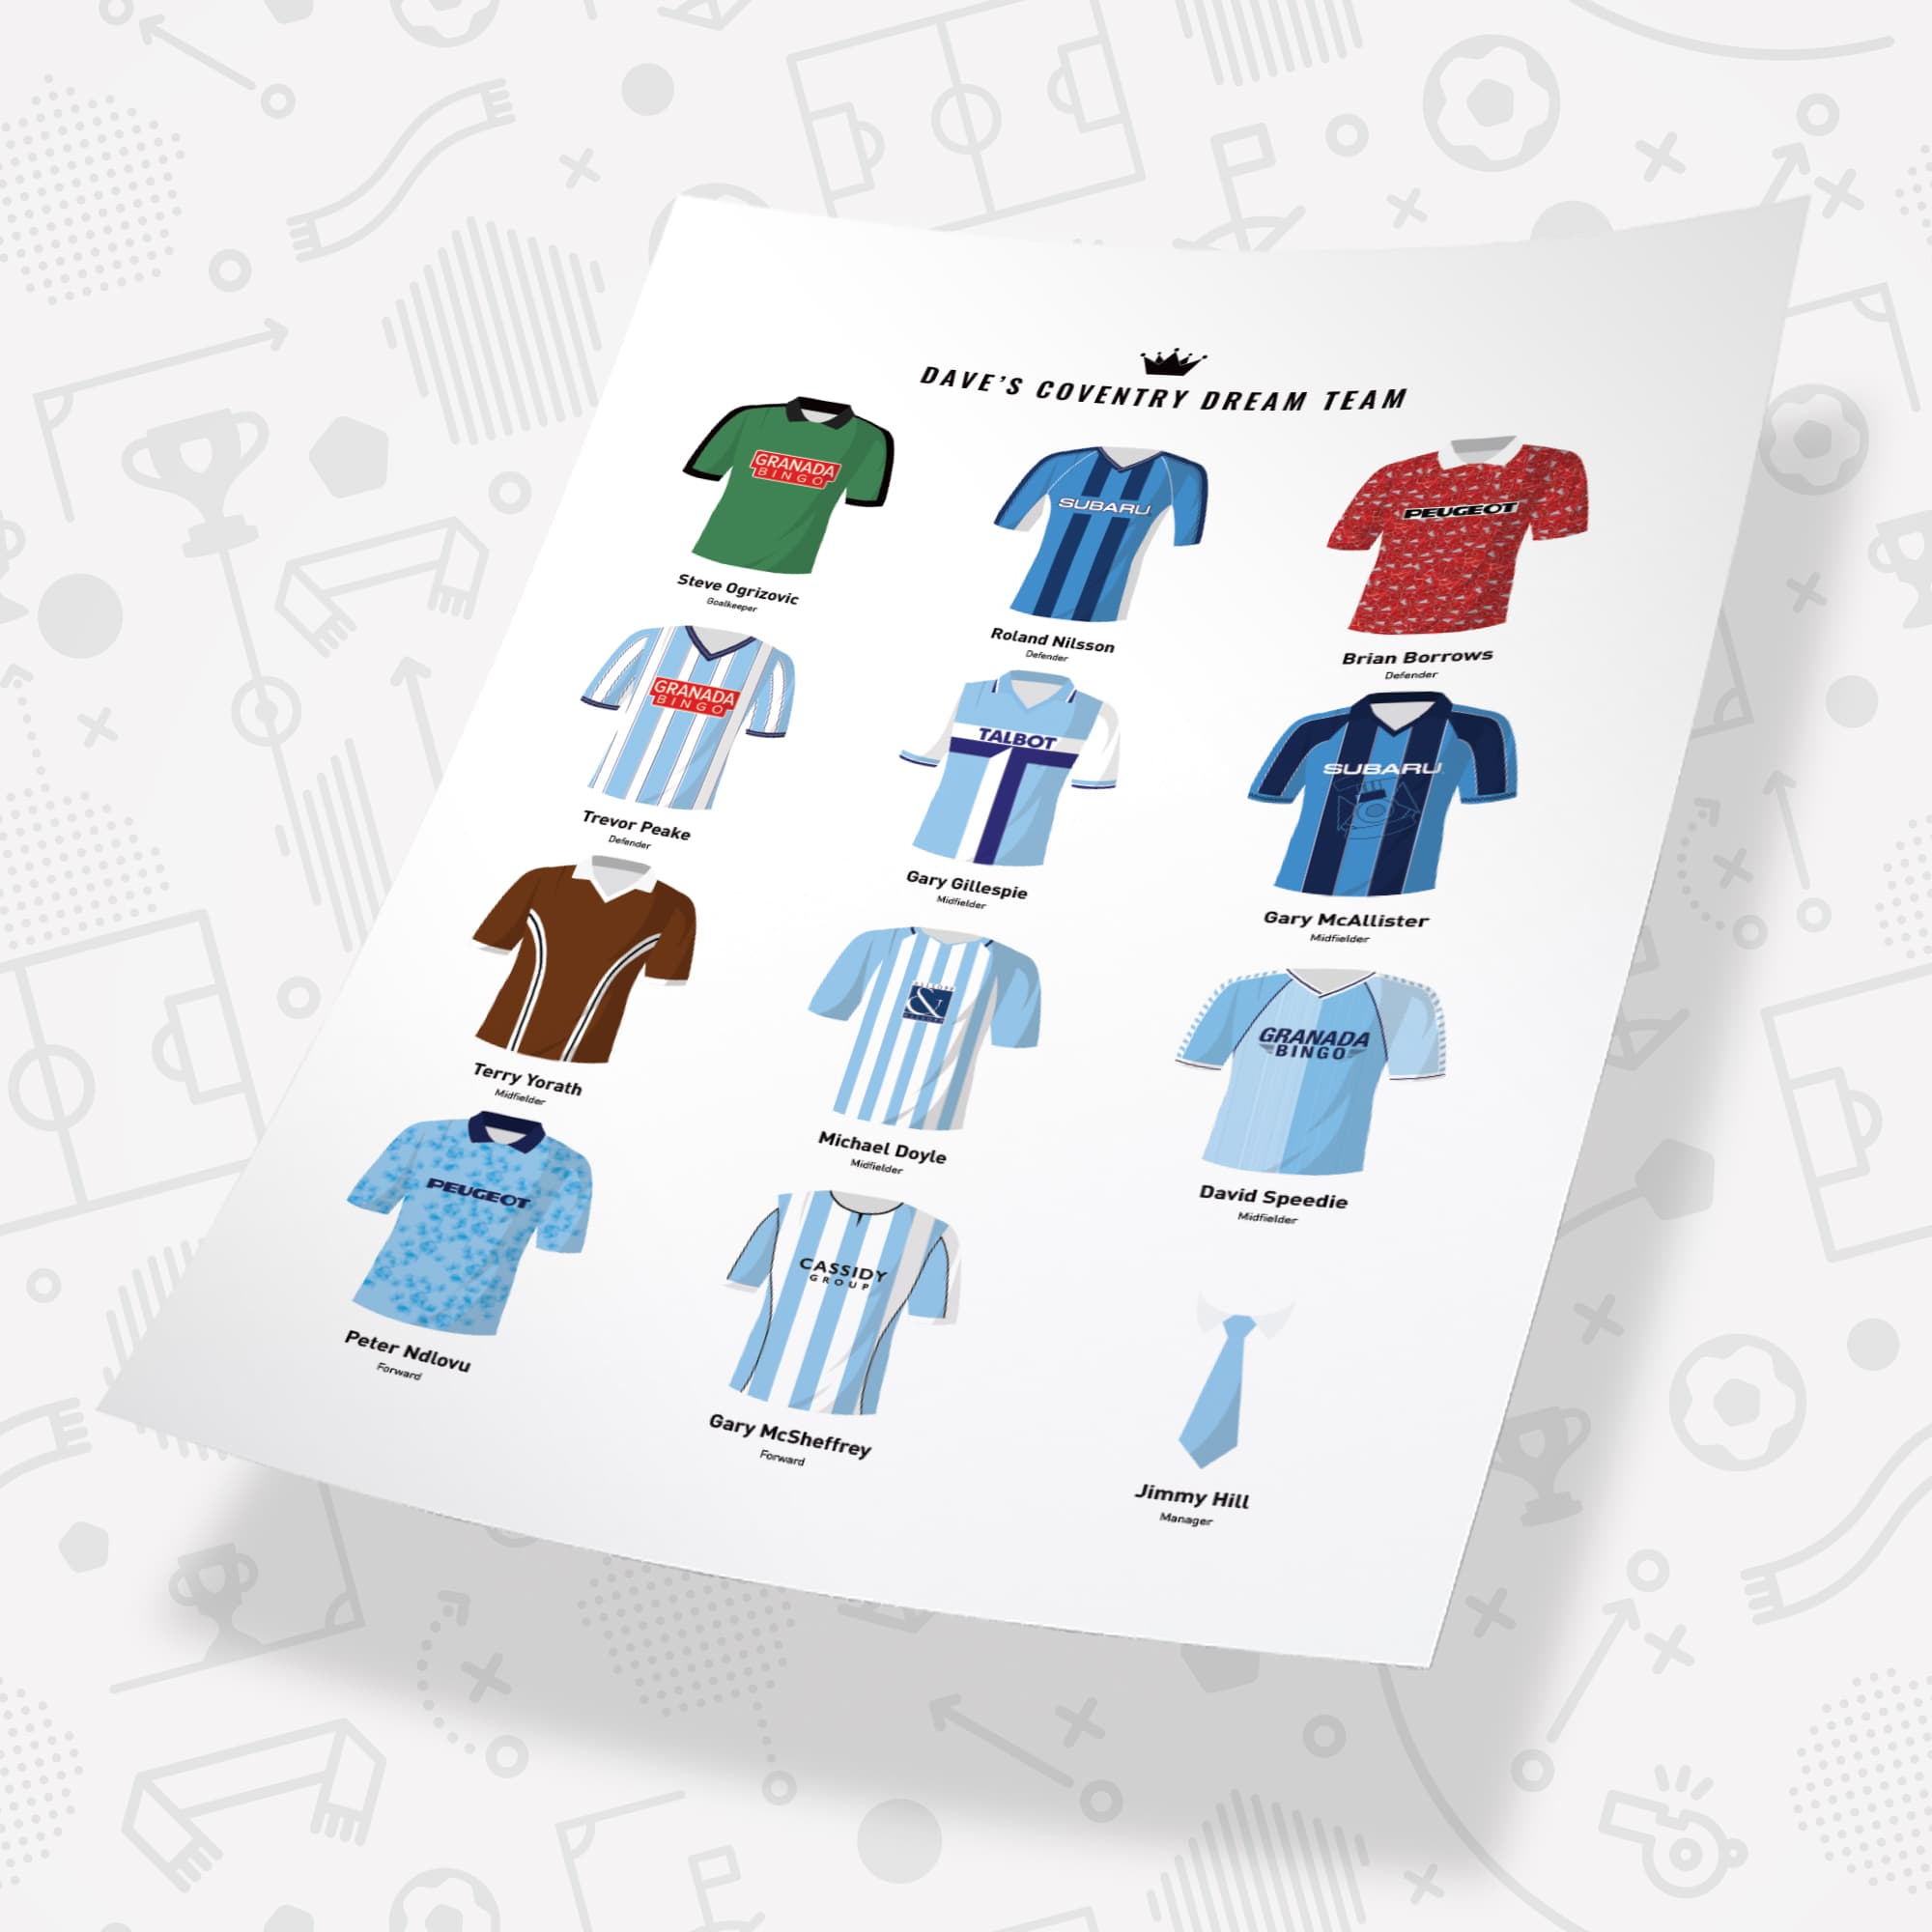 PERSONALISED Coventry Dream Team Football Print Good Team On Paper